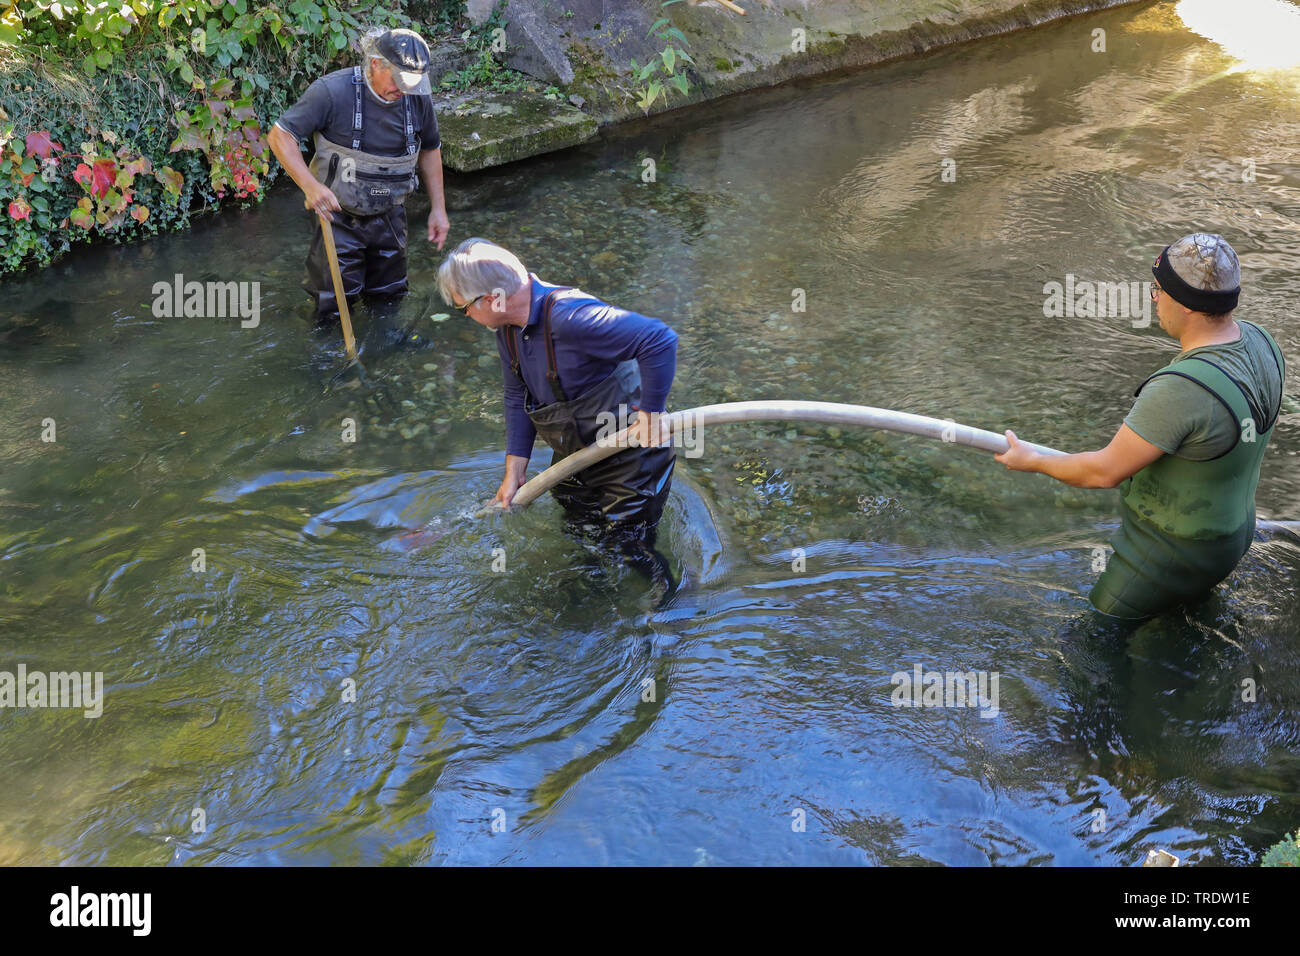 anglers and fire brigade cleaning the gravel spawning ground for some fish species, Germany, Bavaria, Dorfen, Schwaig Stock Photo